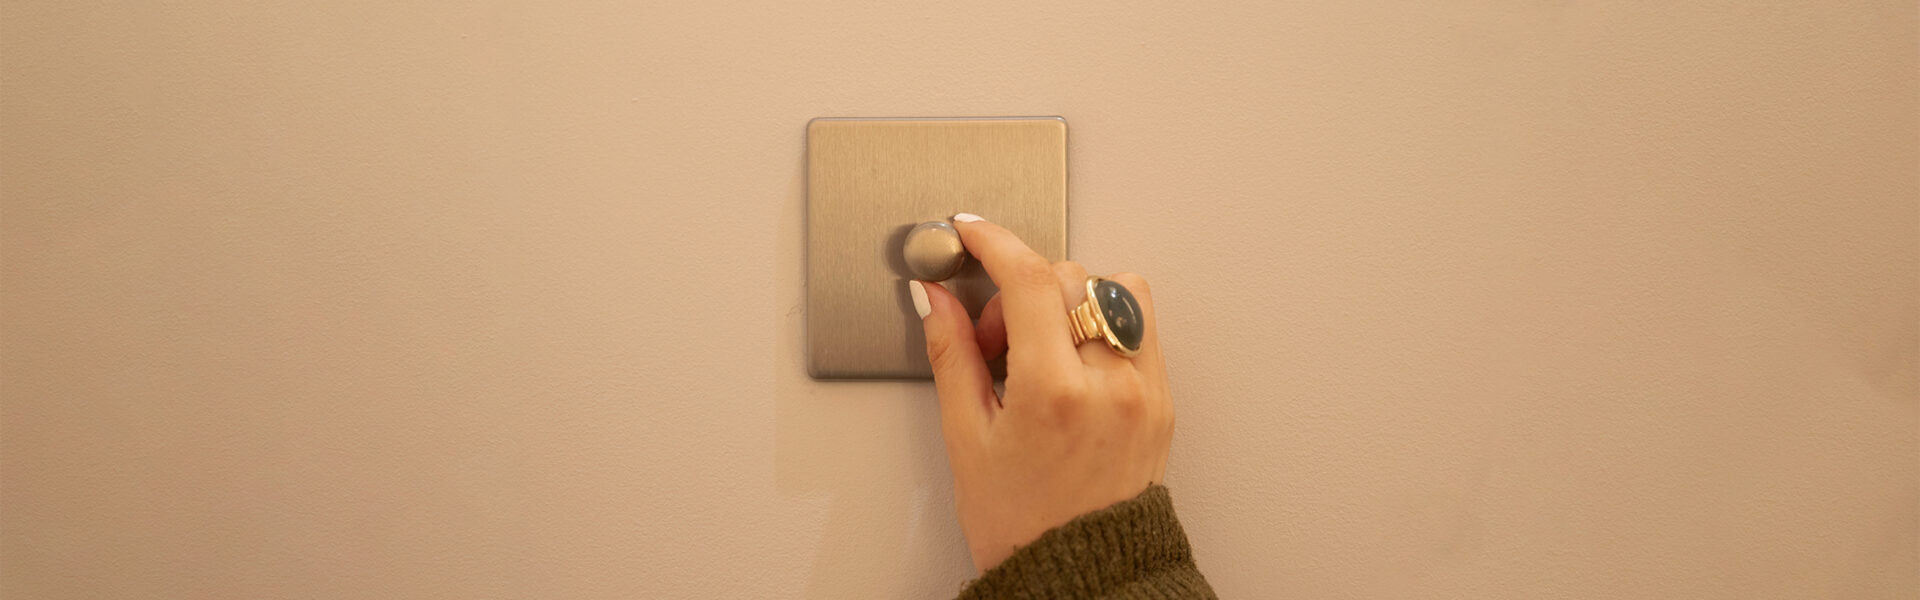 Dimmable light switch on a white wall being dimmed to control the dimmable lighting within the room.